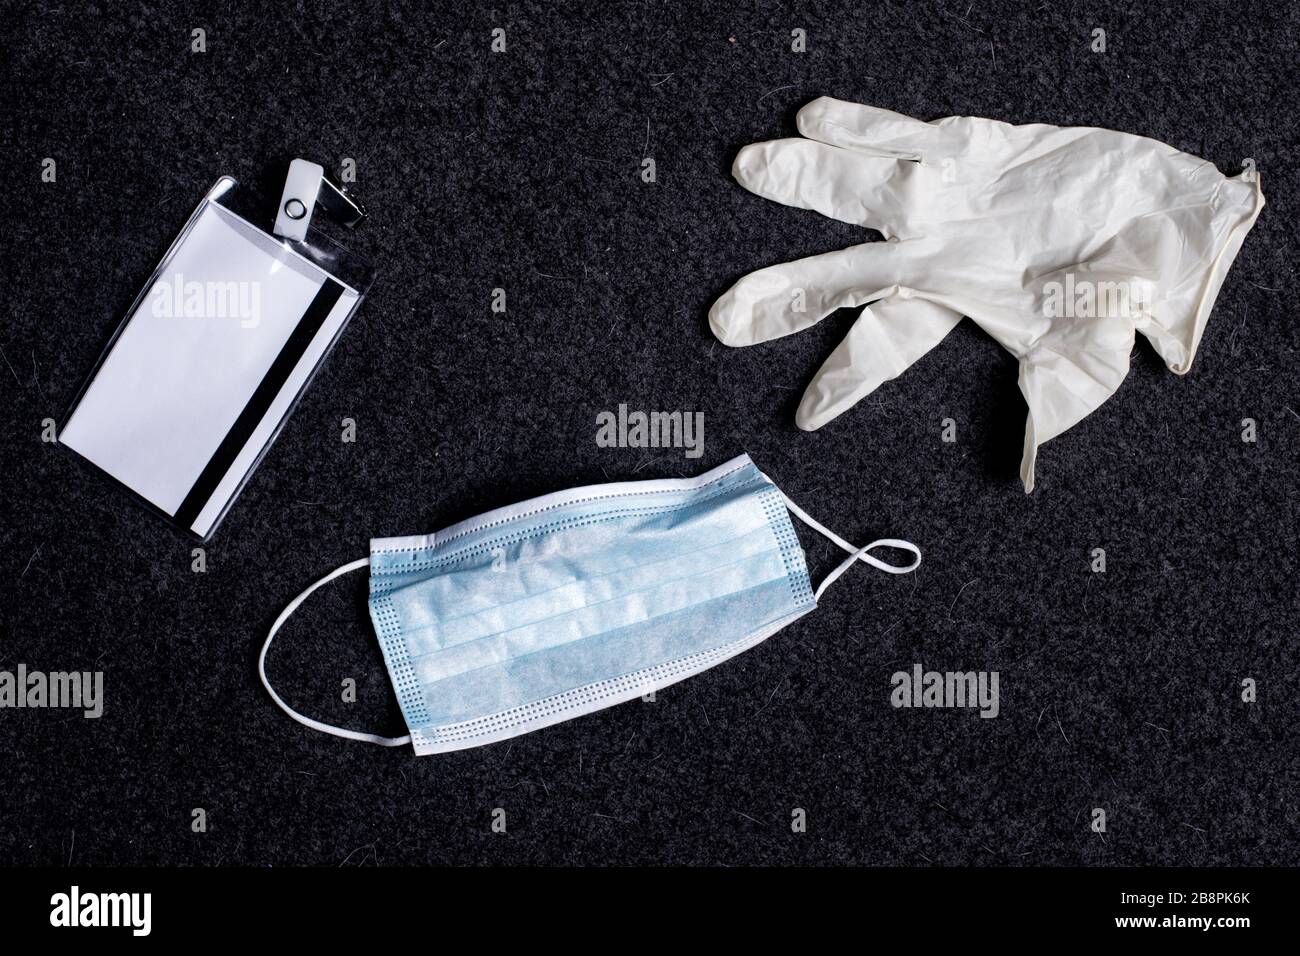 Surgical masks, gloves and ID card on a hospital floor Stock Photo